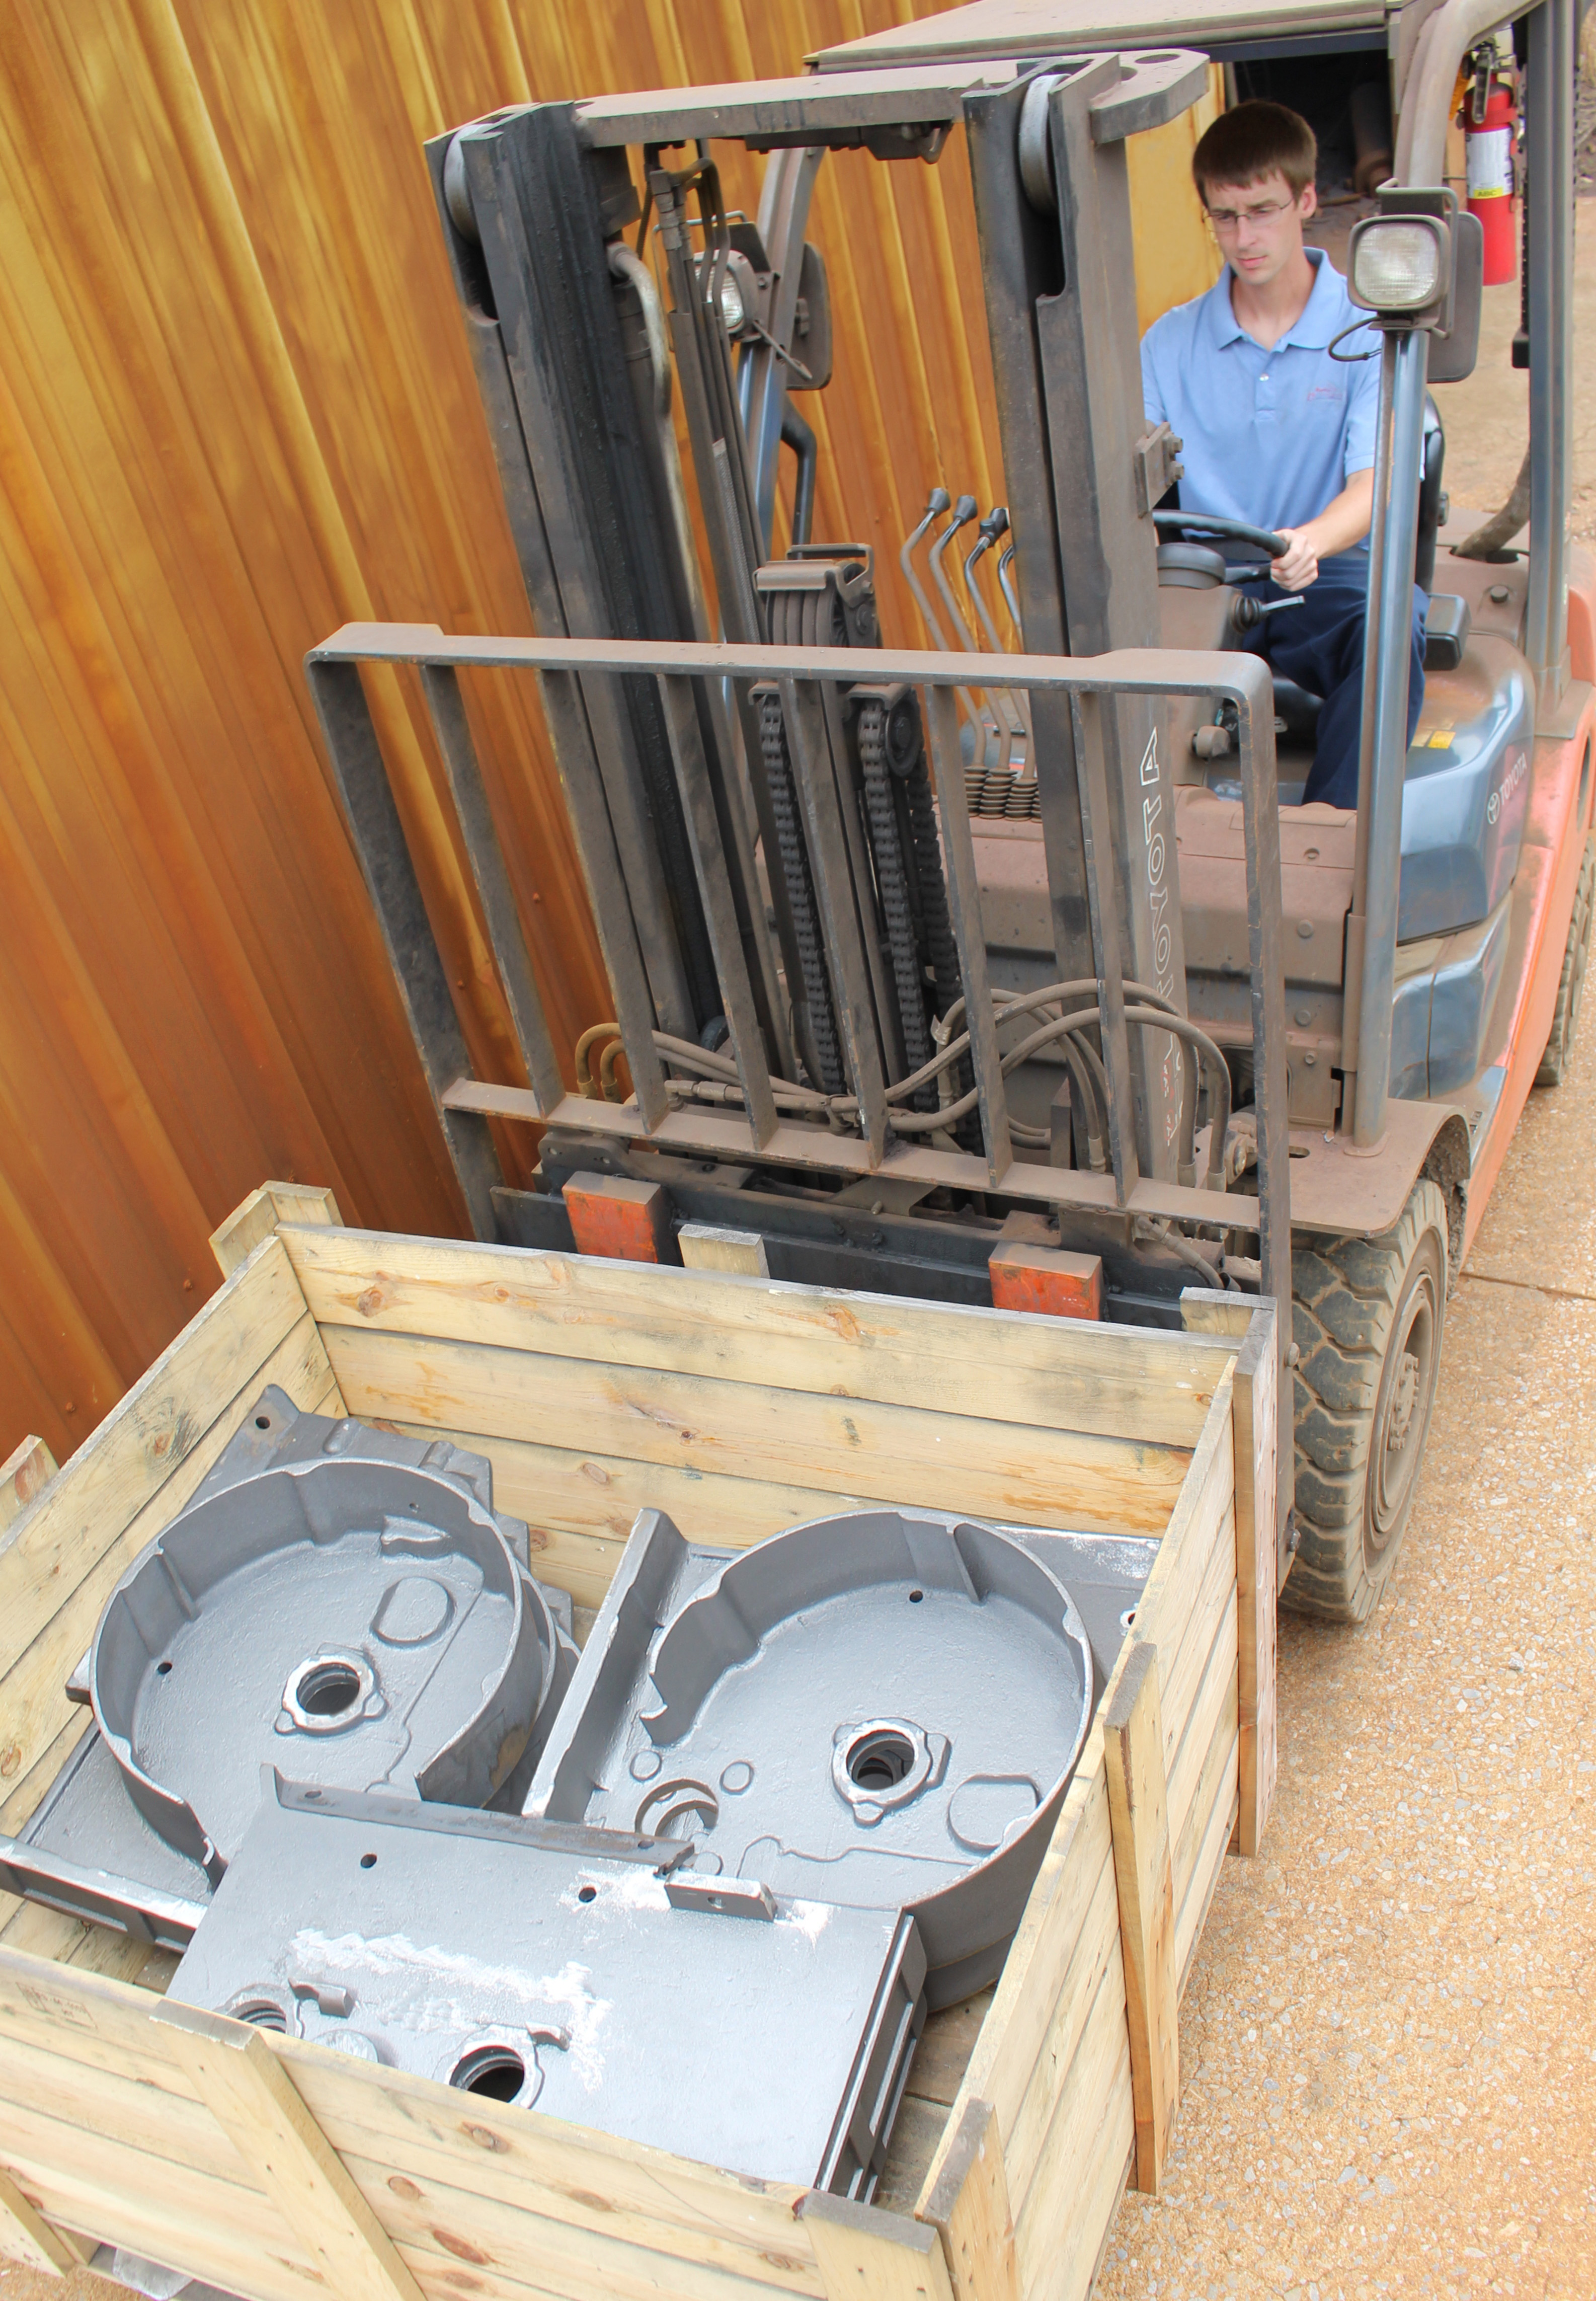 Clarksville Foundry offers turnkey crating and shipping capabilities.